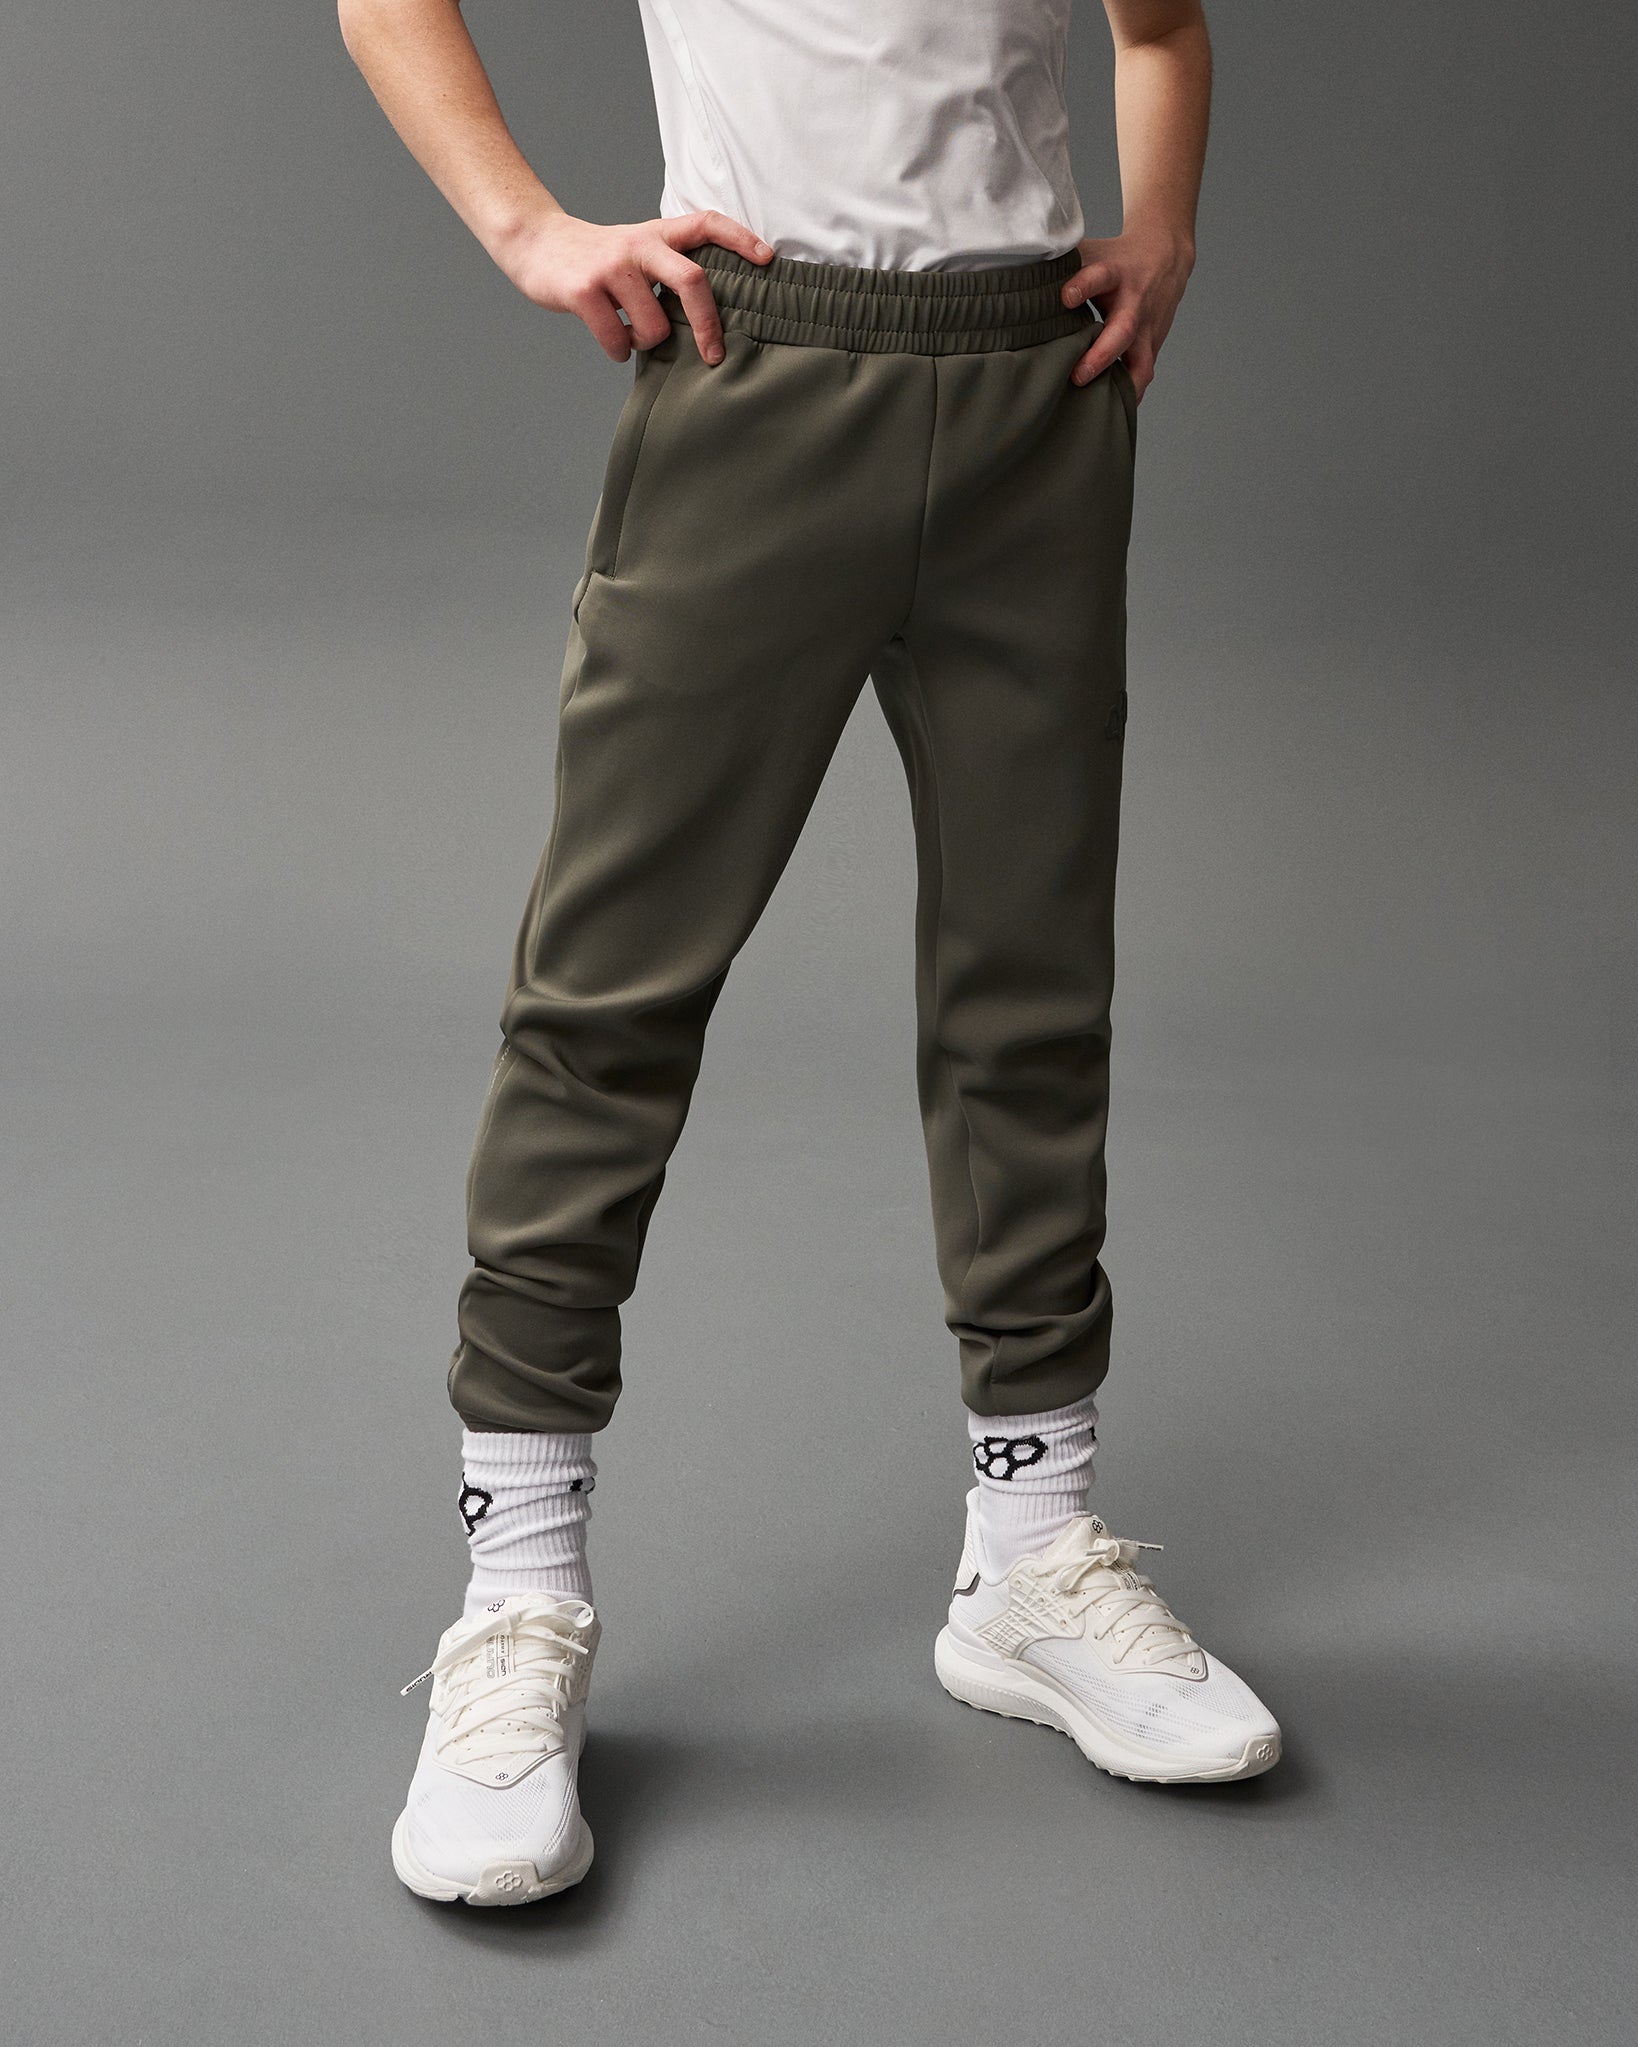 adidas Essential Logo Track Pant | Cool outfits for men, Adidas outfit,  Mens pants